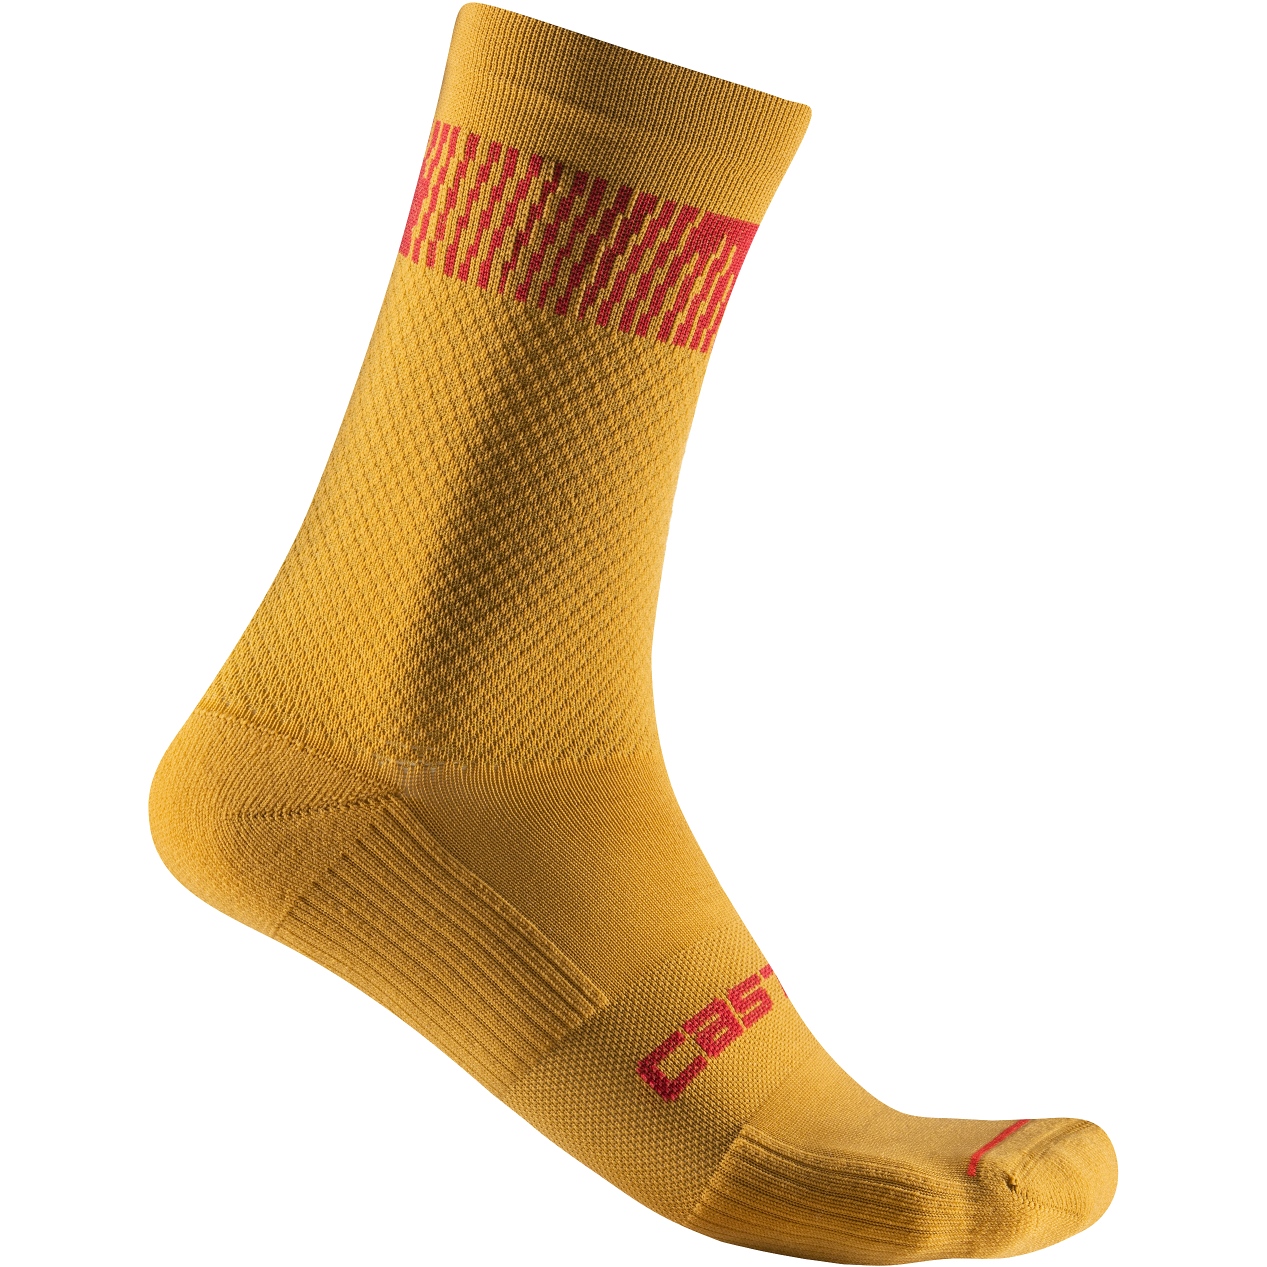 Picture of Castelli Unlimited 18 Socks - goldenrod/rich red 755